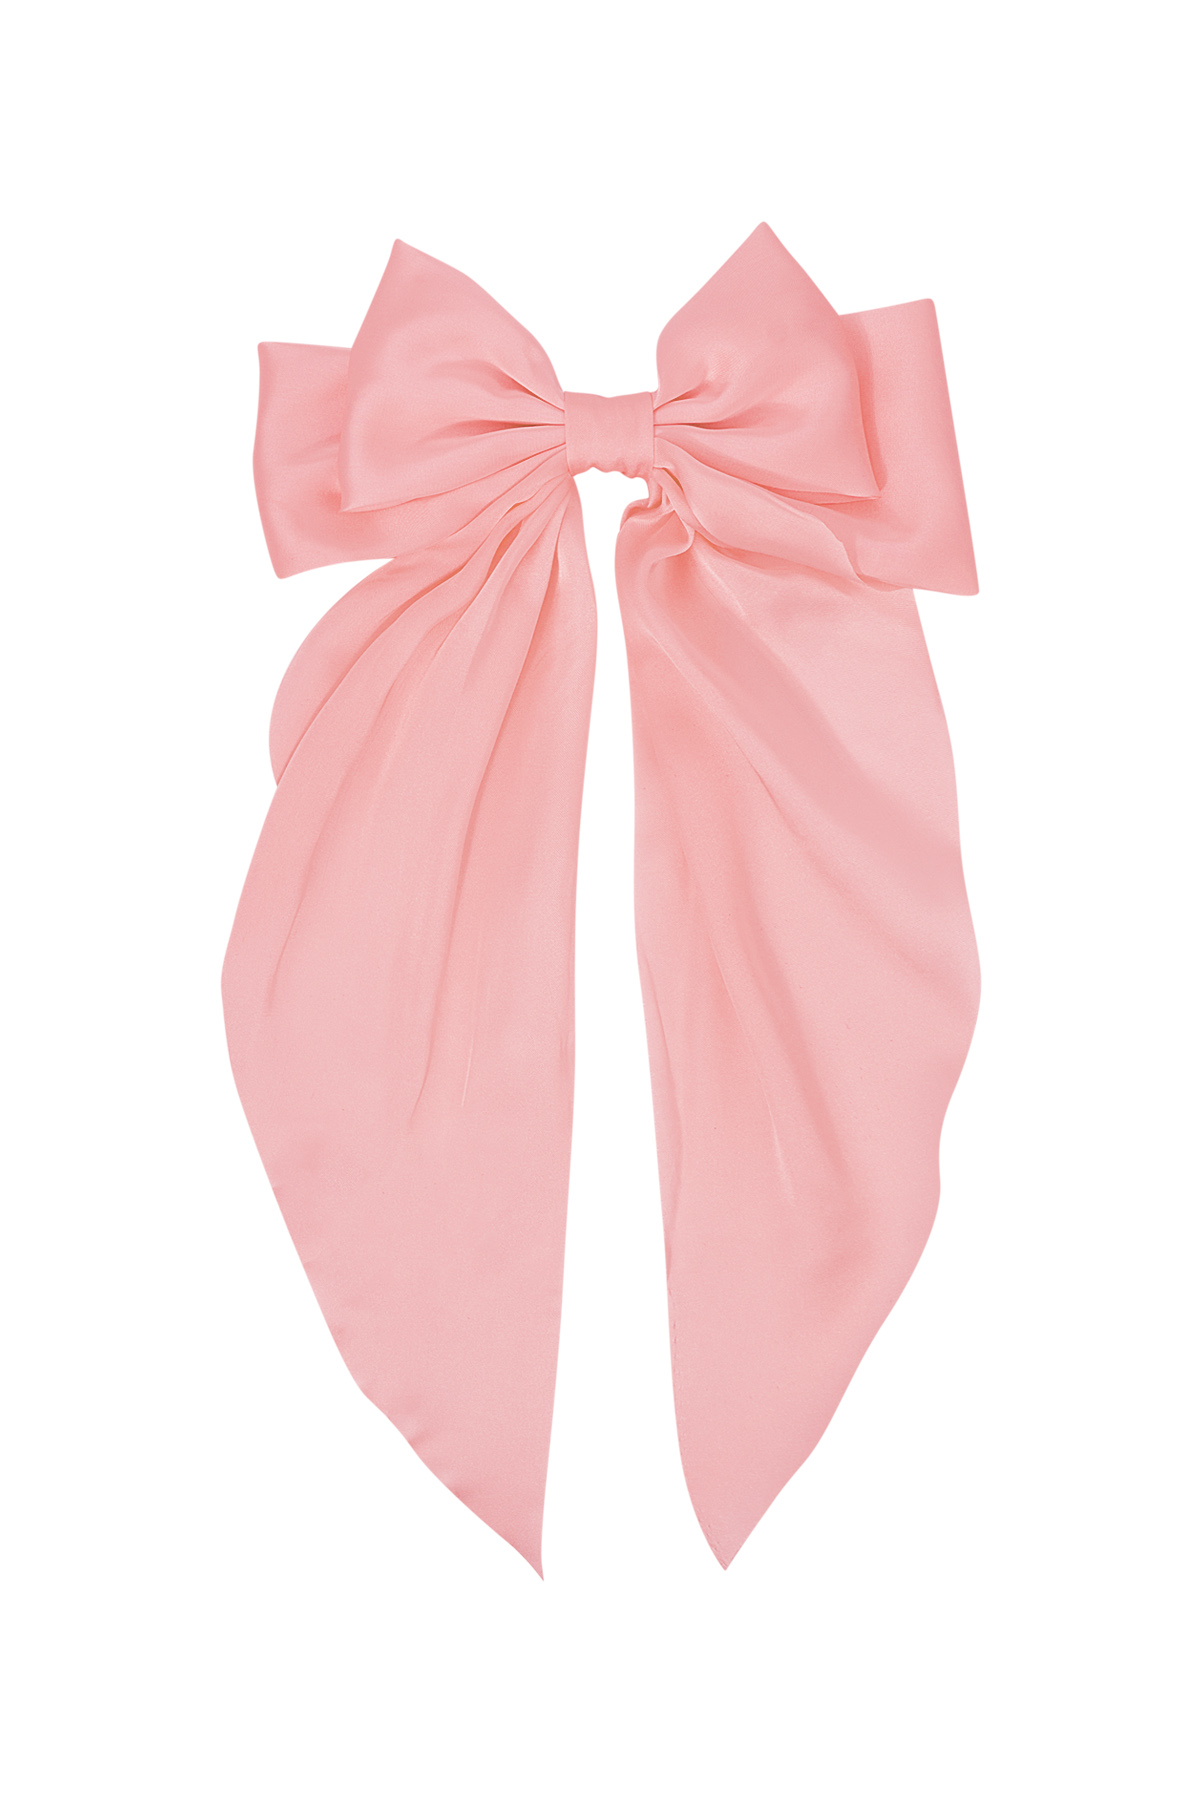 Large hair bow - pink